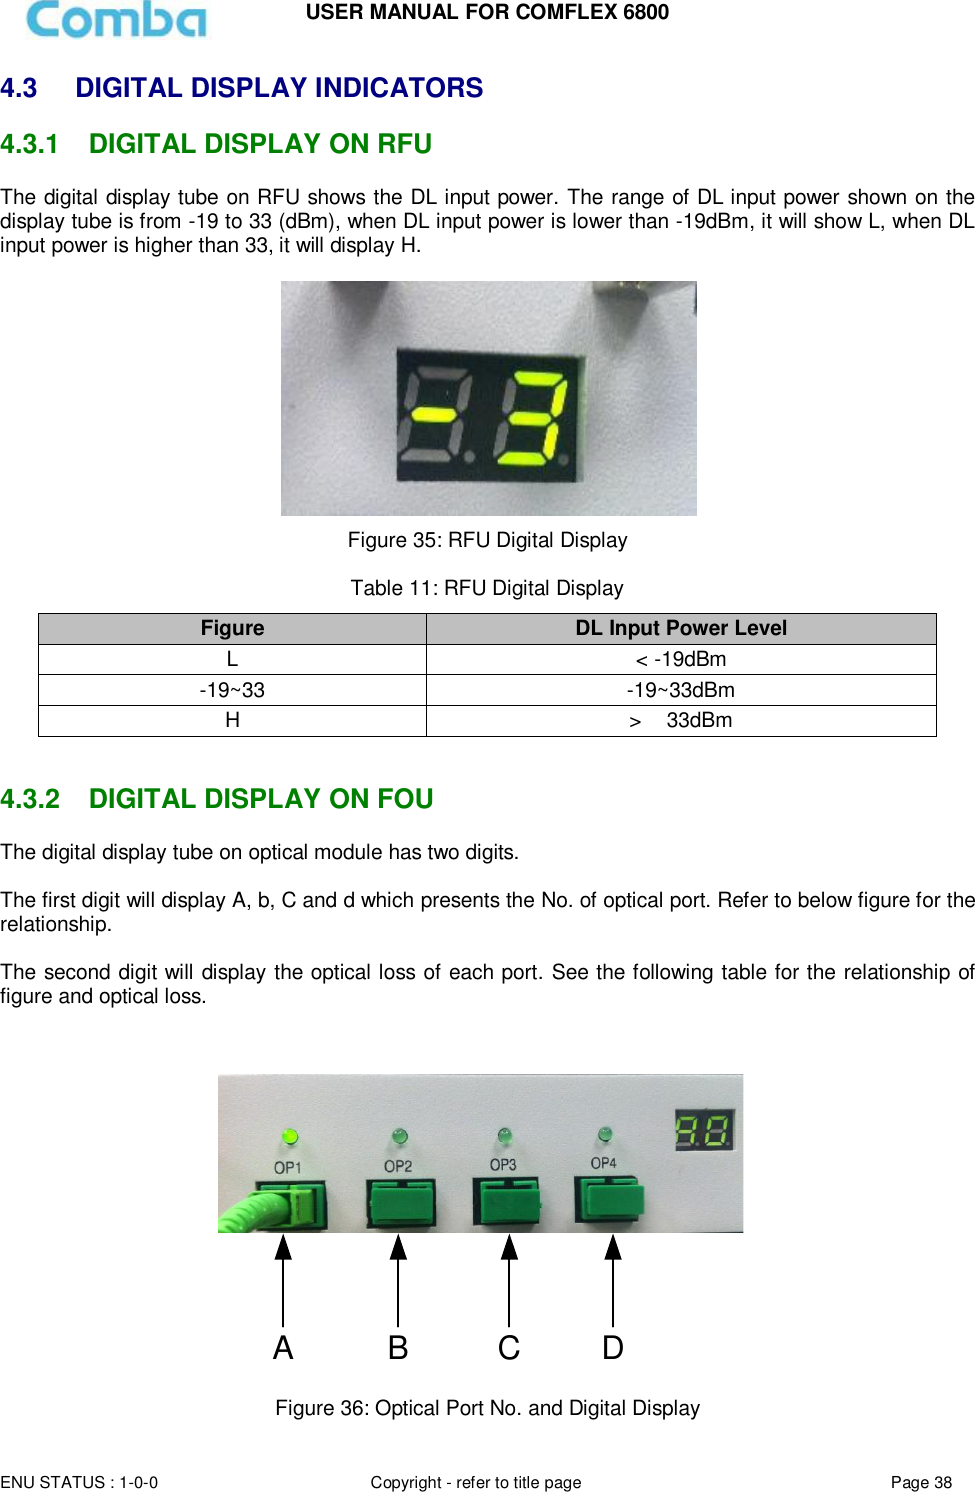 USER MANUAL FOR COMFLEX 6800  ENU STATUS : 1-0-0 Copyright - refer to title page Page 38     4.3  DIGITAL DISPLAY INDICATORS 4.3.1  DIGITAL DISPLAY ON RFU The digital display tube on RFU shows the DL input power. The range of DL input power shown on the display tube is from -19 to 33 (dBm), when DL input power is lower than -19dBm, it will show L, when DL input power is higher than 33, it will display H.    Figure 35: RFU Digital Display  Table 11: RFU Digital Display  Figure DL Input Power Level L &lt; -19dBm -19~33 -19~33dBm H &gt;  33dBm   4.3.2  DIGITAL DISPLAY ON FOU The digital display tube on optical module has two digits.   The first digit will display A, b, C and d which presents the No. of optical port. Refer to below figure for the relationship.  The second digit will display the optical loss of each port. See the following table for the relationship of figure and optical loss.  AB C D  Figure 36: Optical Port No. and Digital Display 